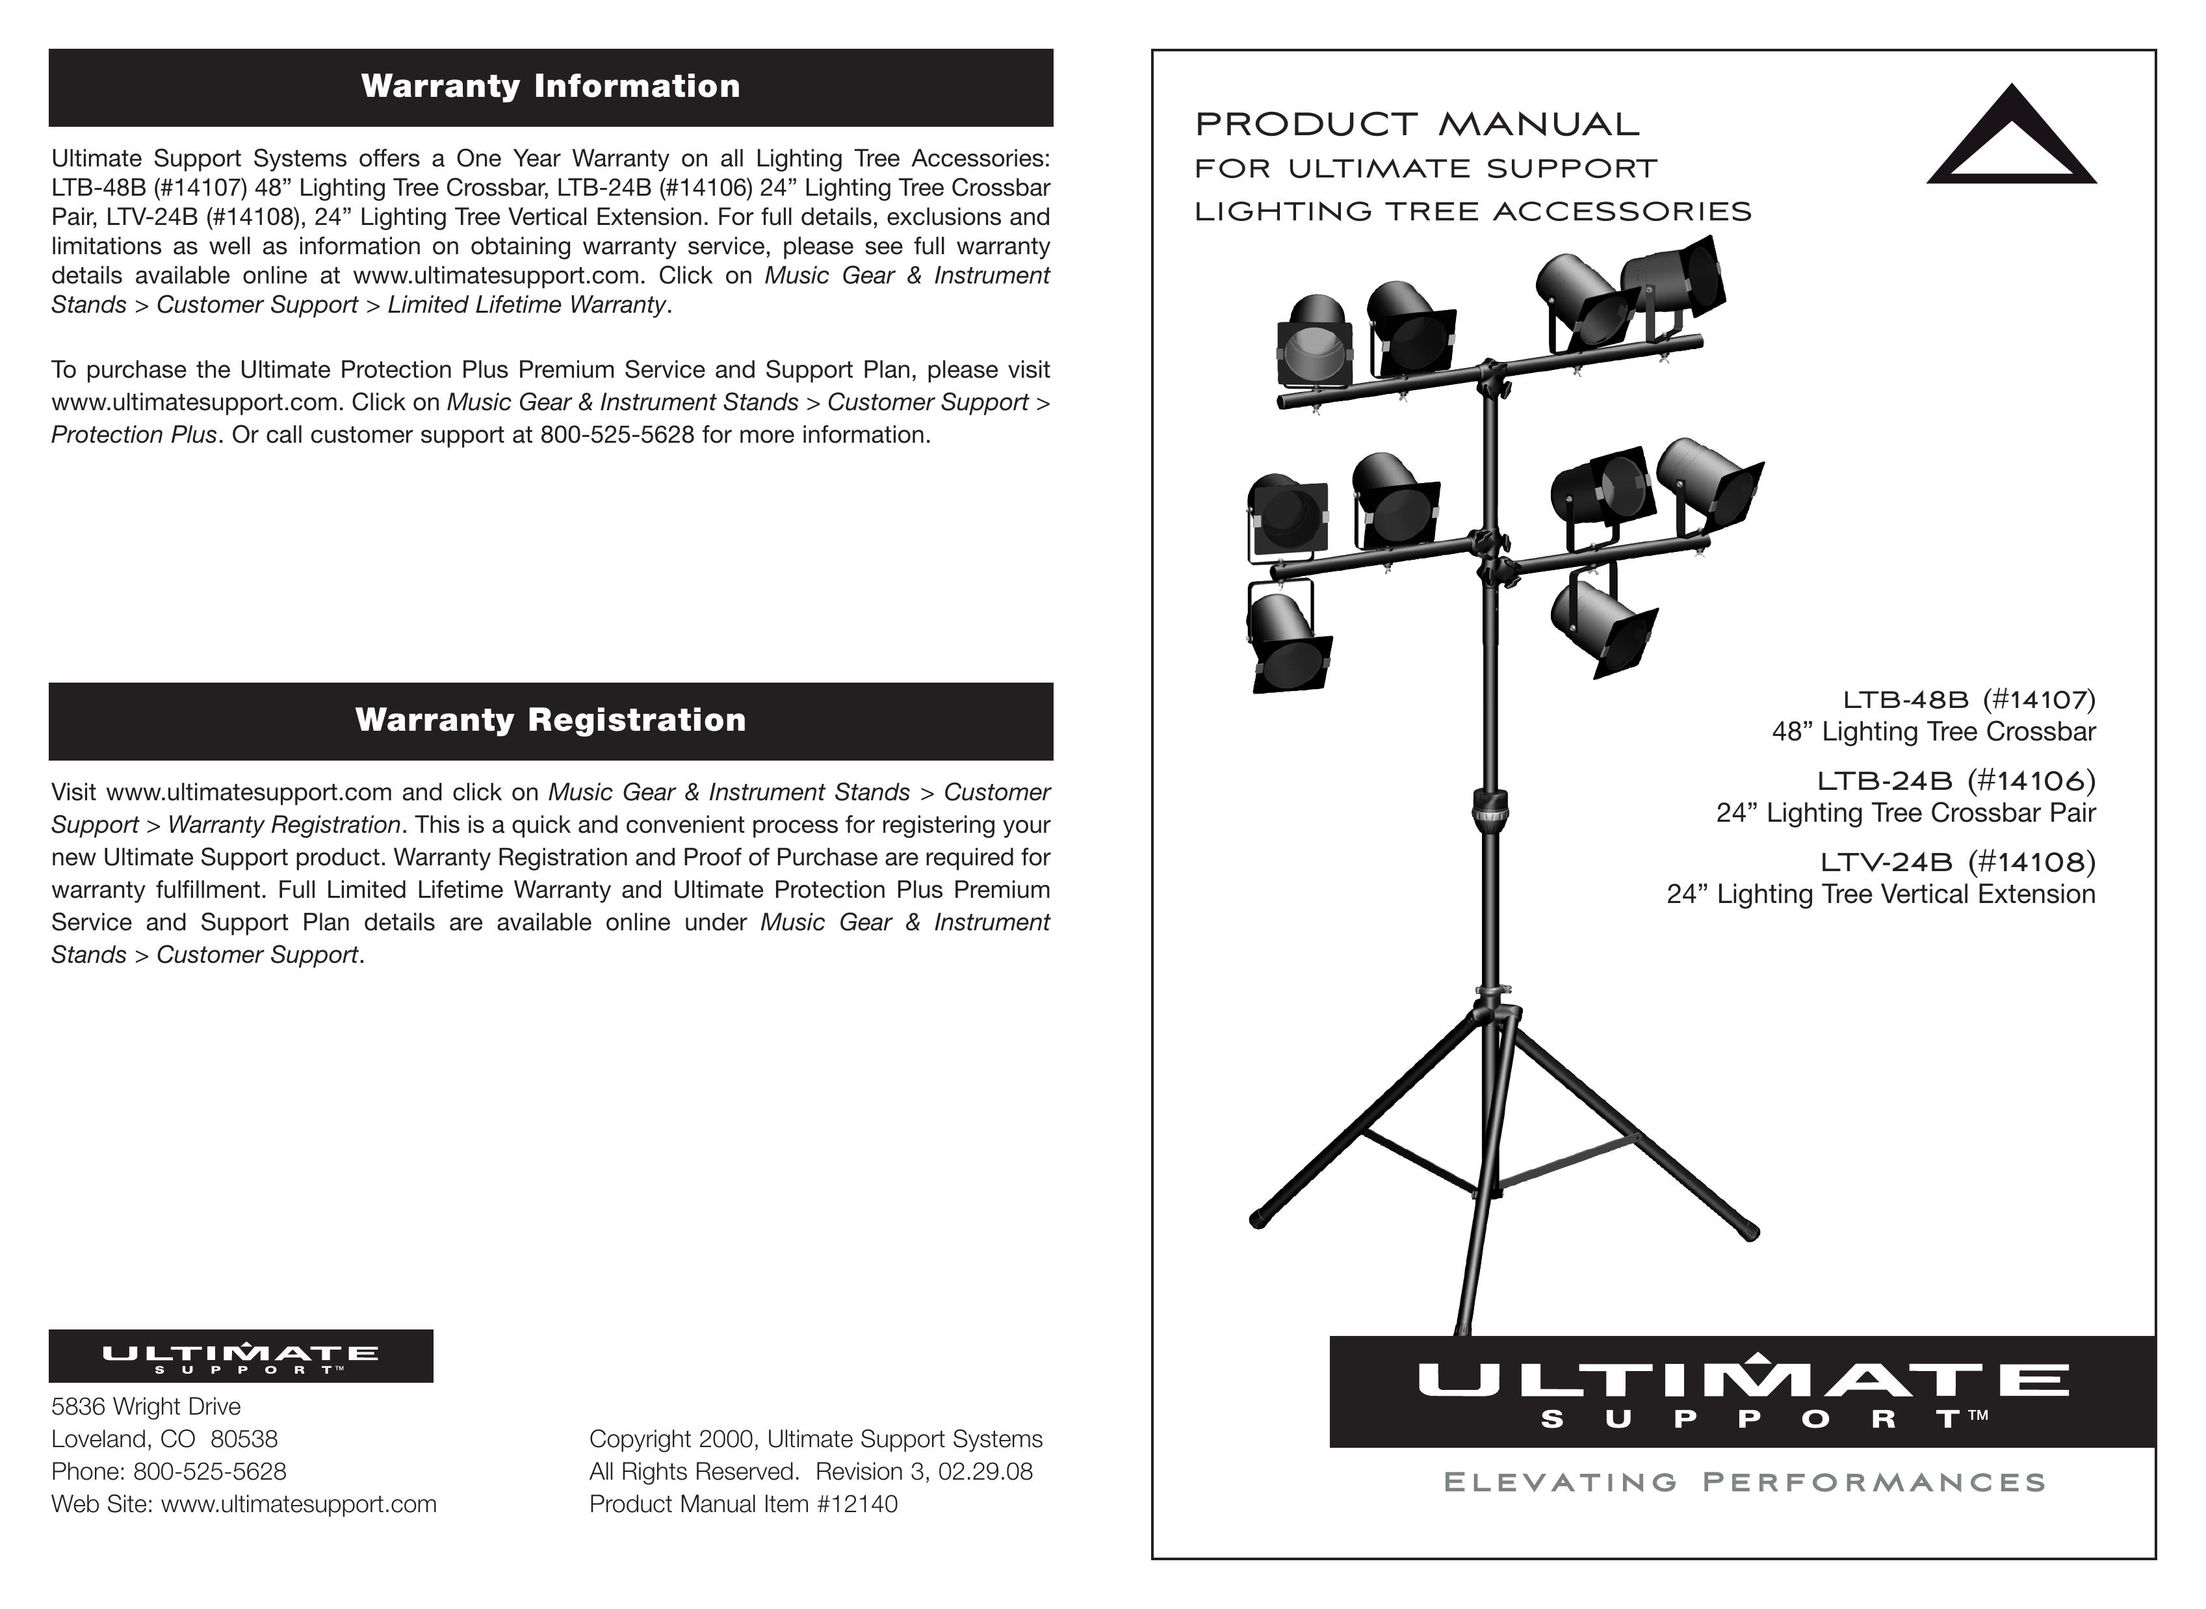 Ultimate Support Systems LTB-24B Indoor Furnishings User Manual